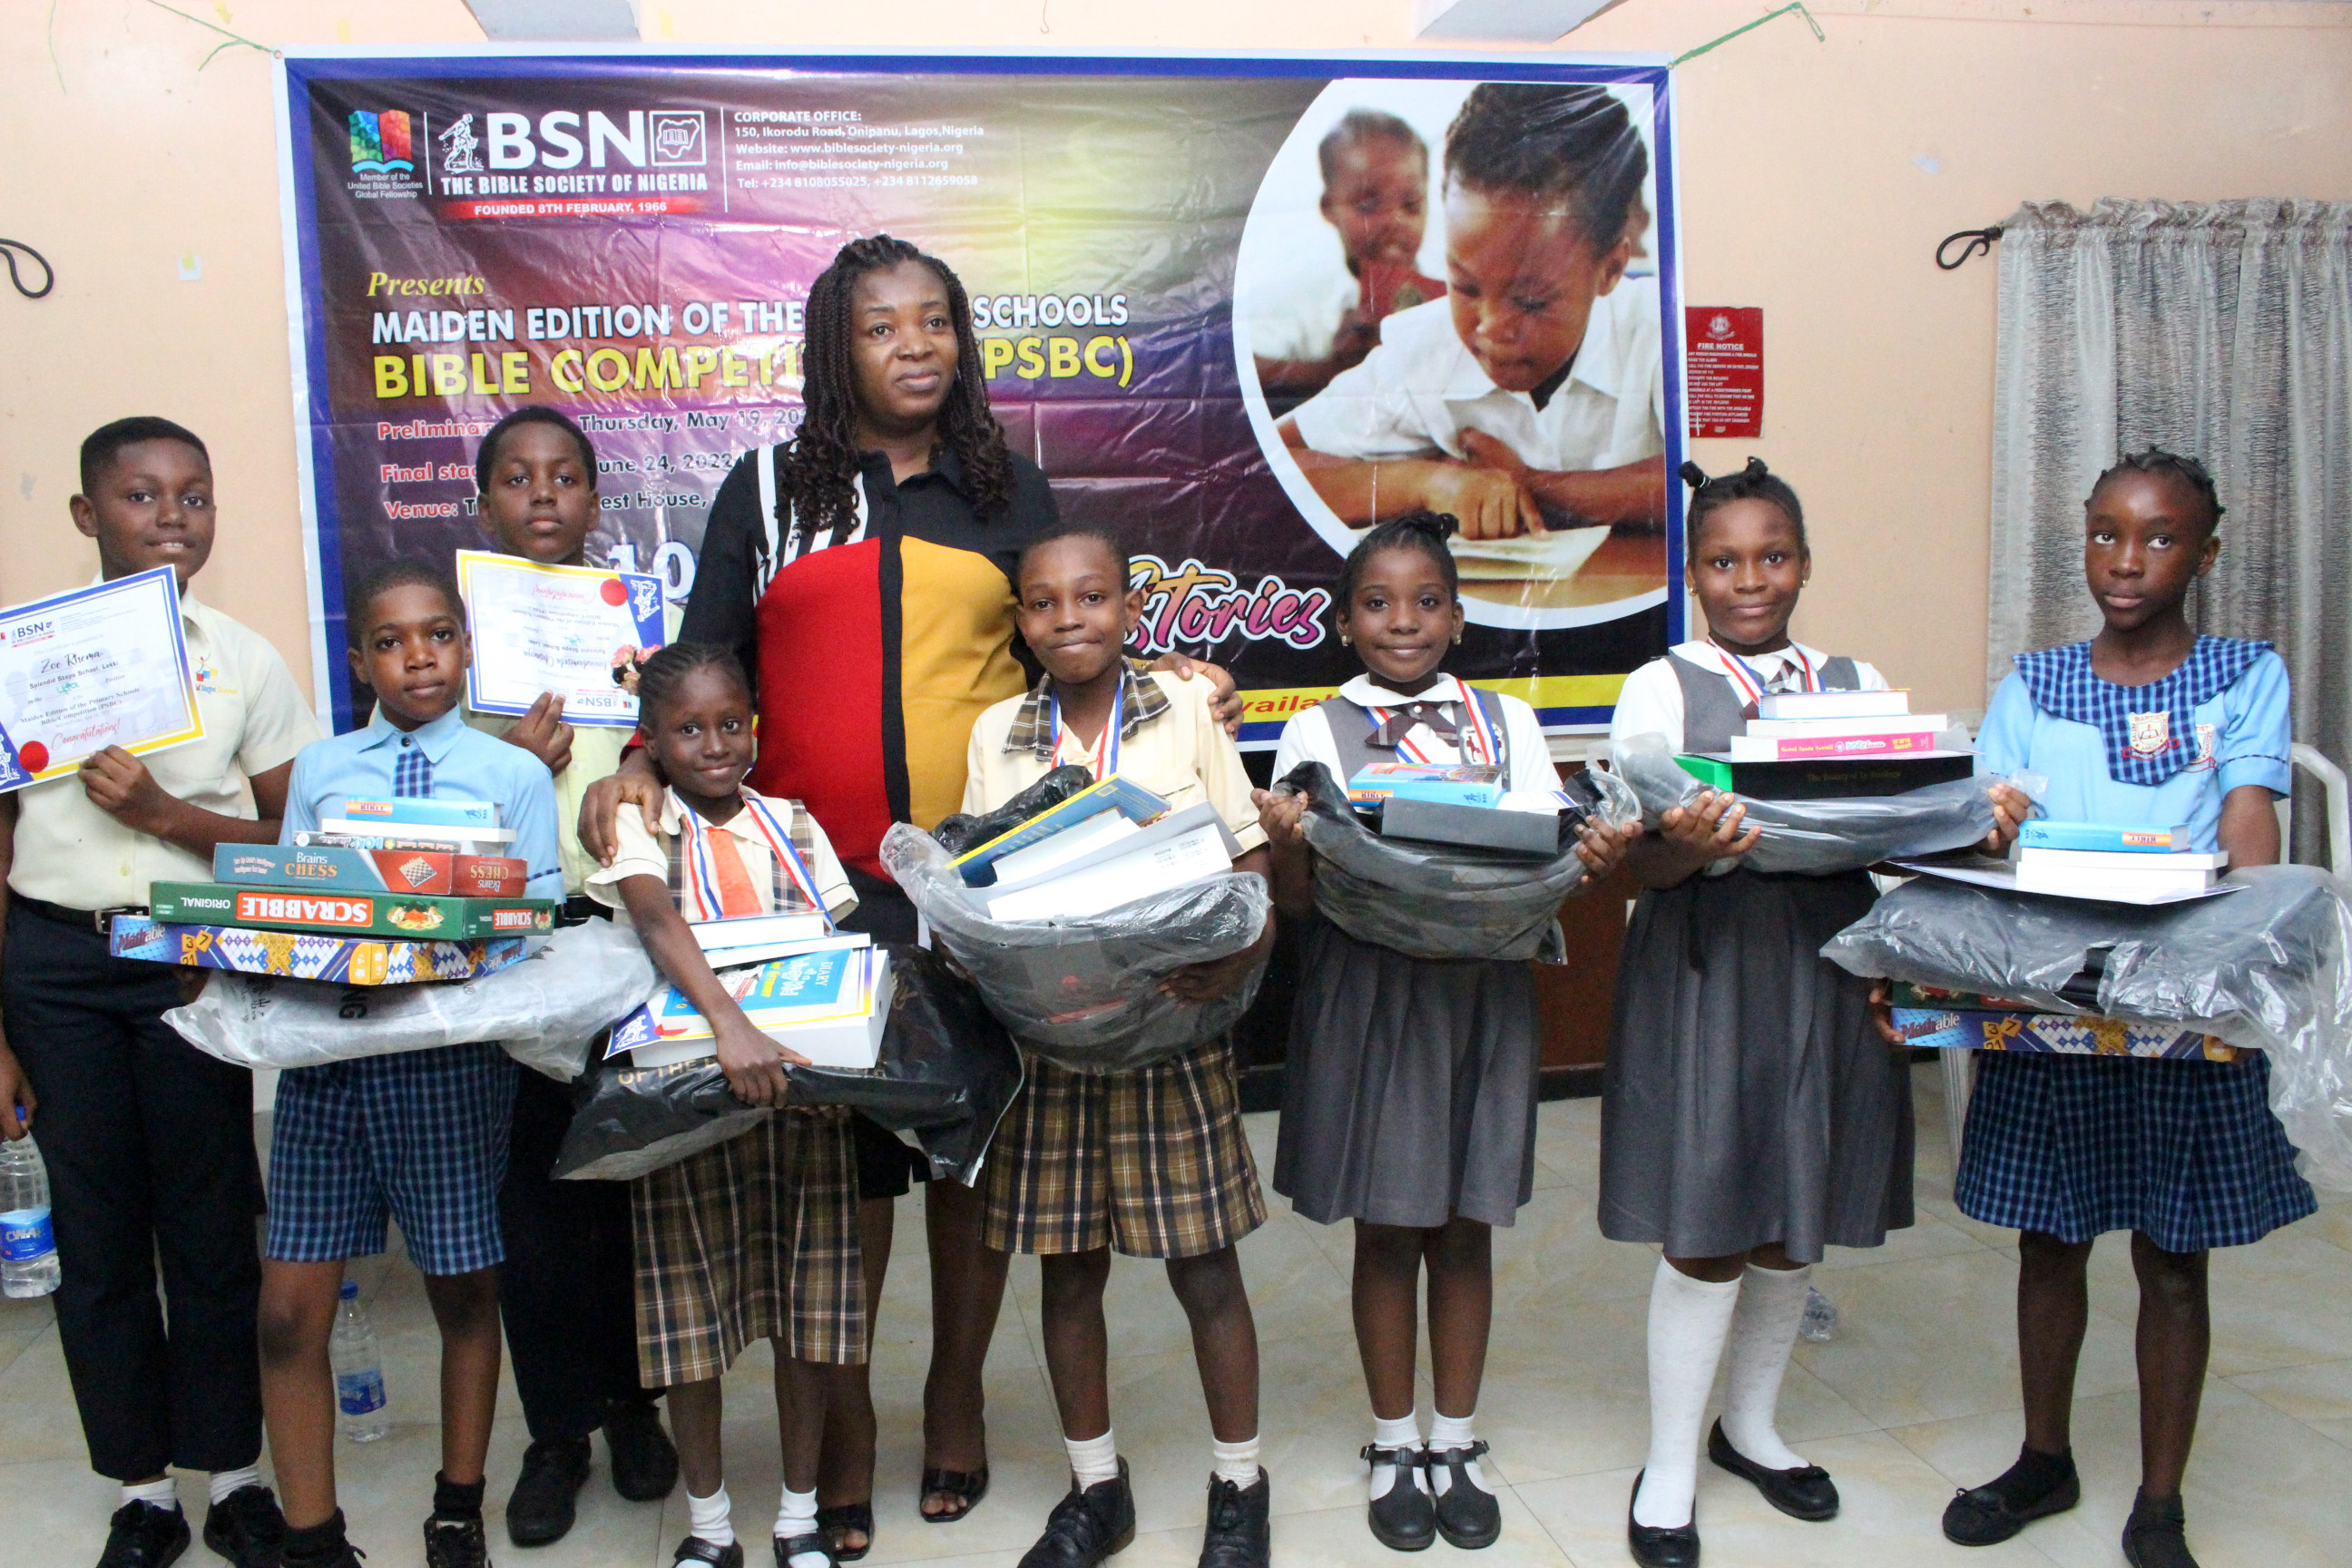 Primary Schools Bible Competition (PSBC)